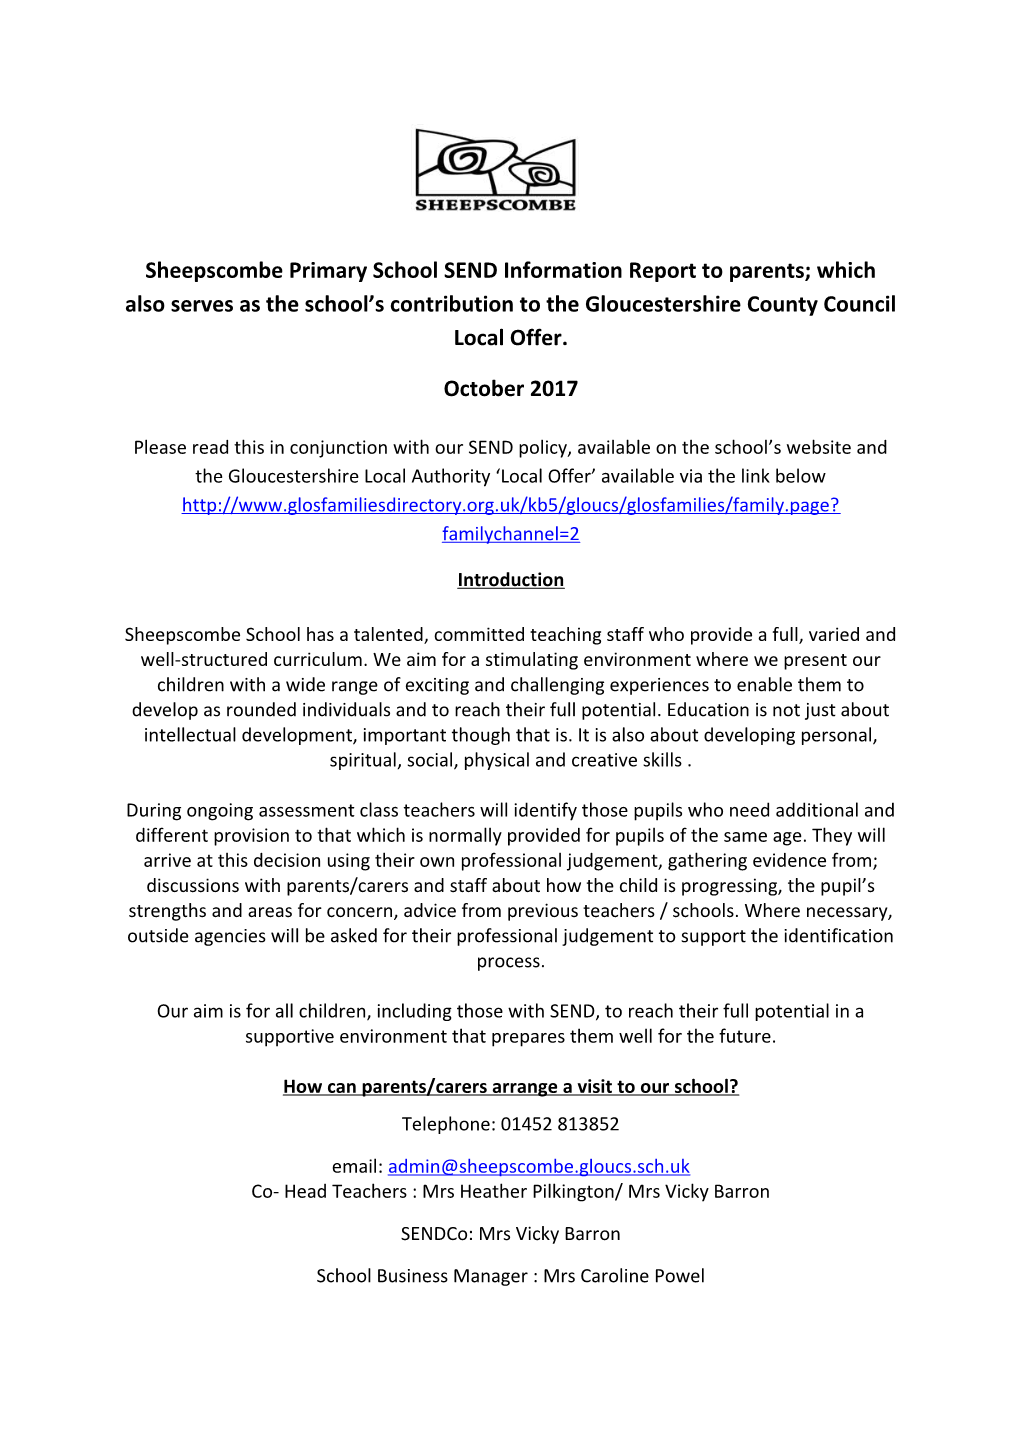 Sheepscombe Primary School SEND Information Report to Parents; Which Also Serves As The